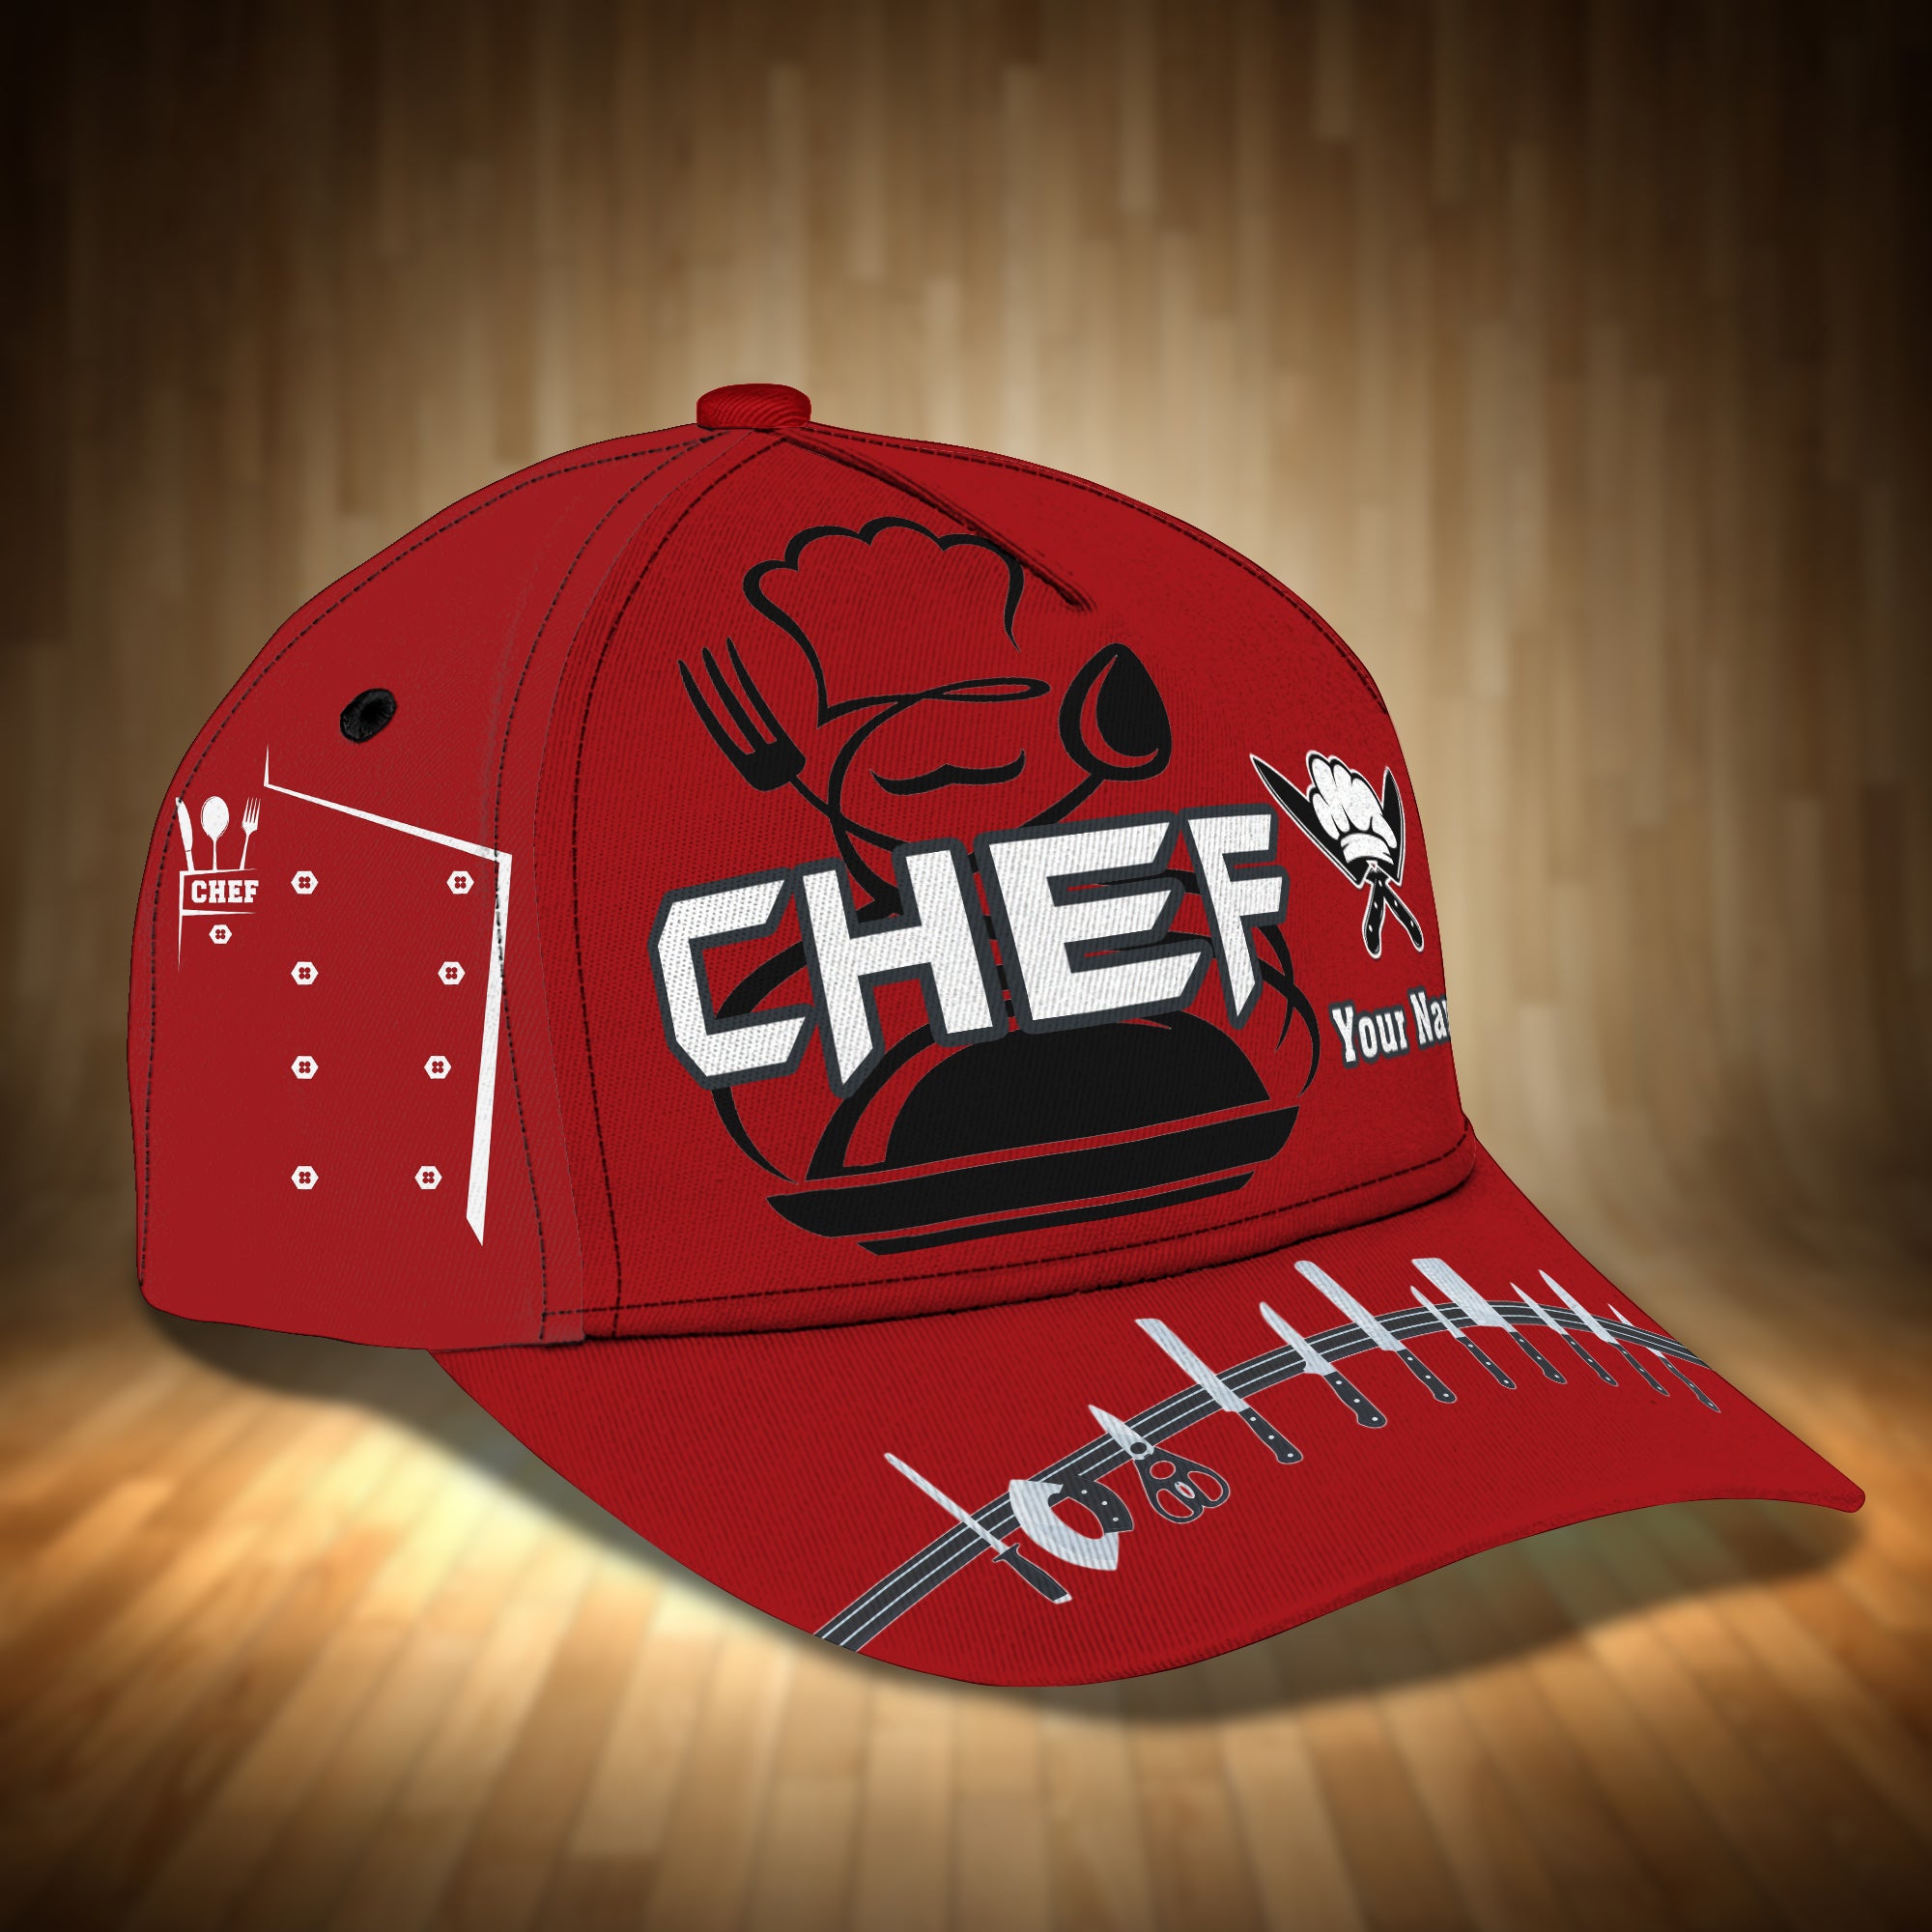 CHEF - Personalized Name Cap 15 - RINC98